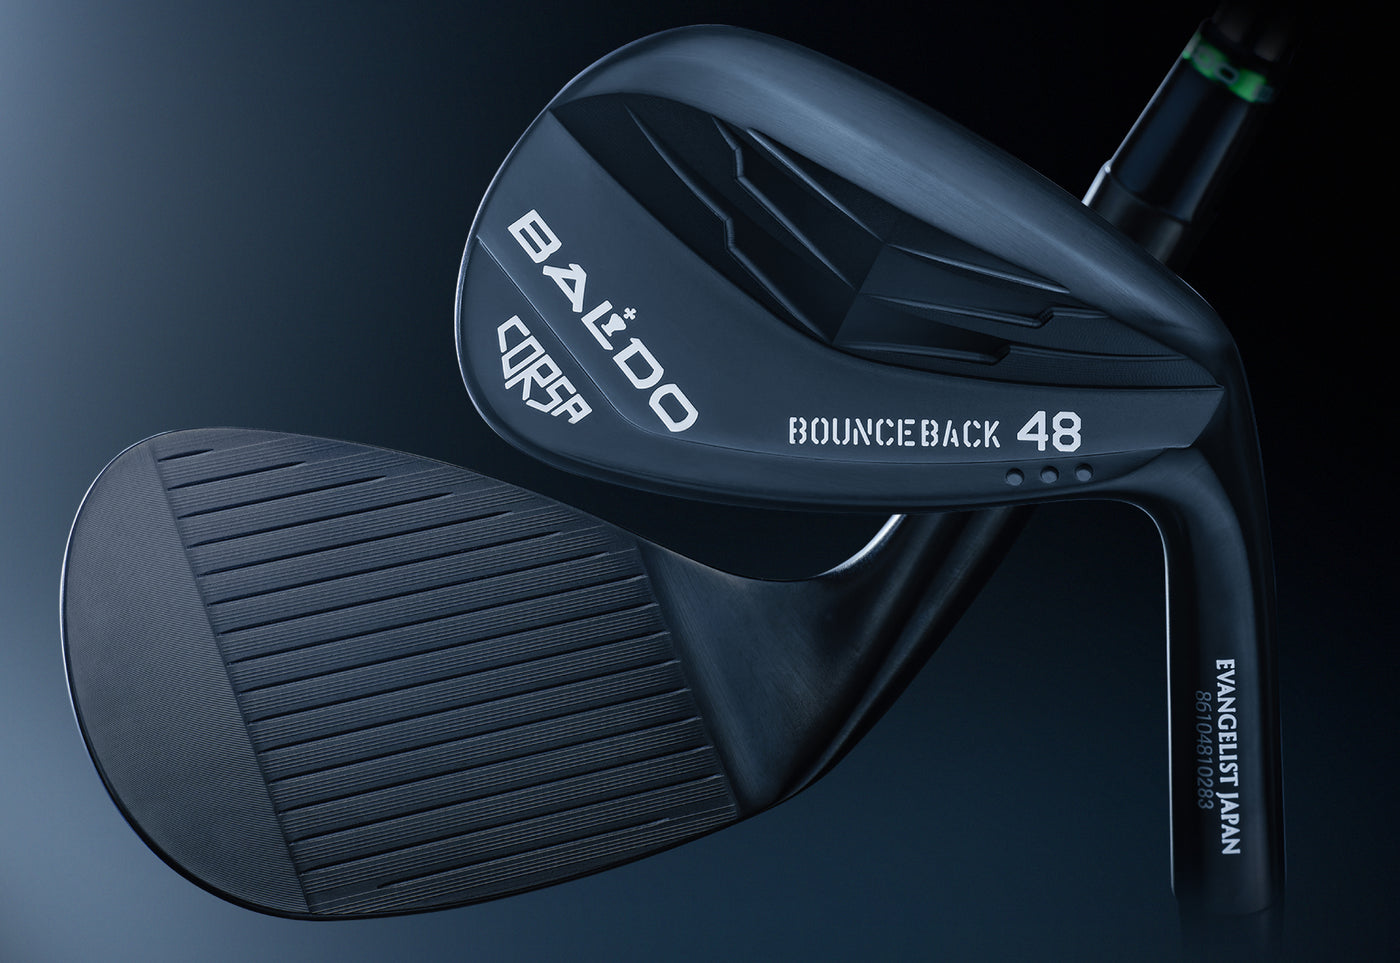 2022 CORSA FORGED BOUNCE BACK WEDGE TOUR KNIGHT